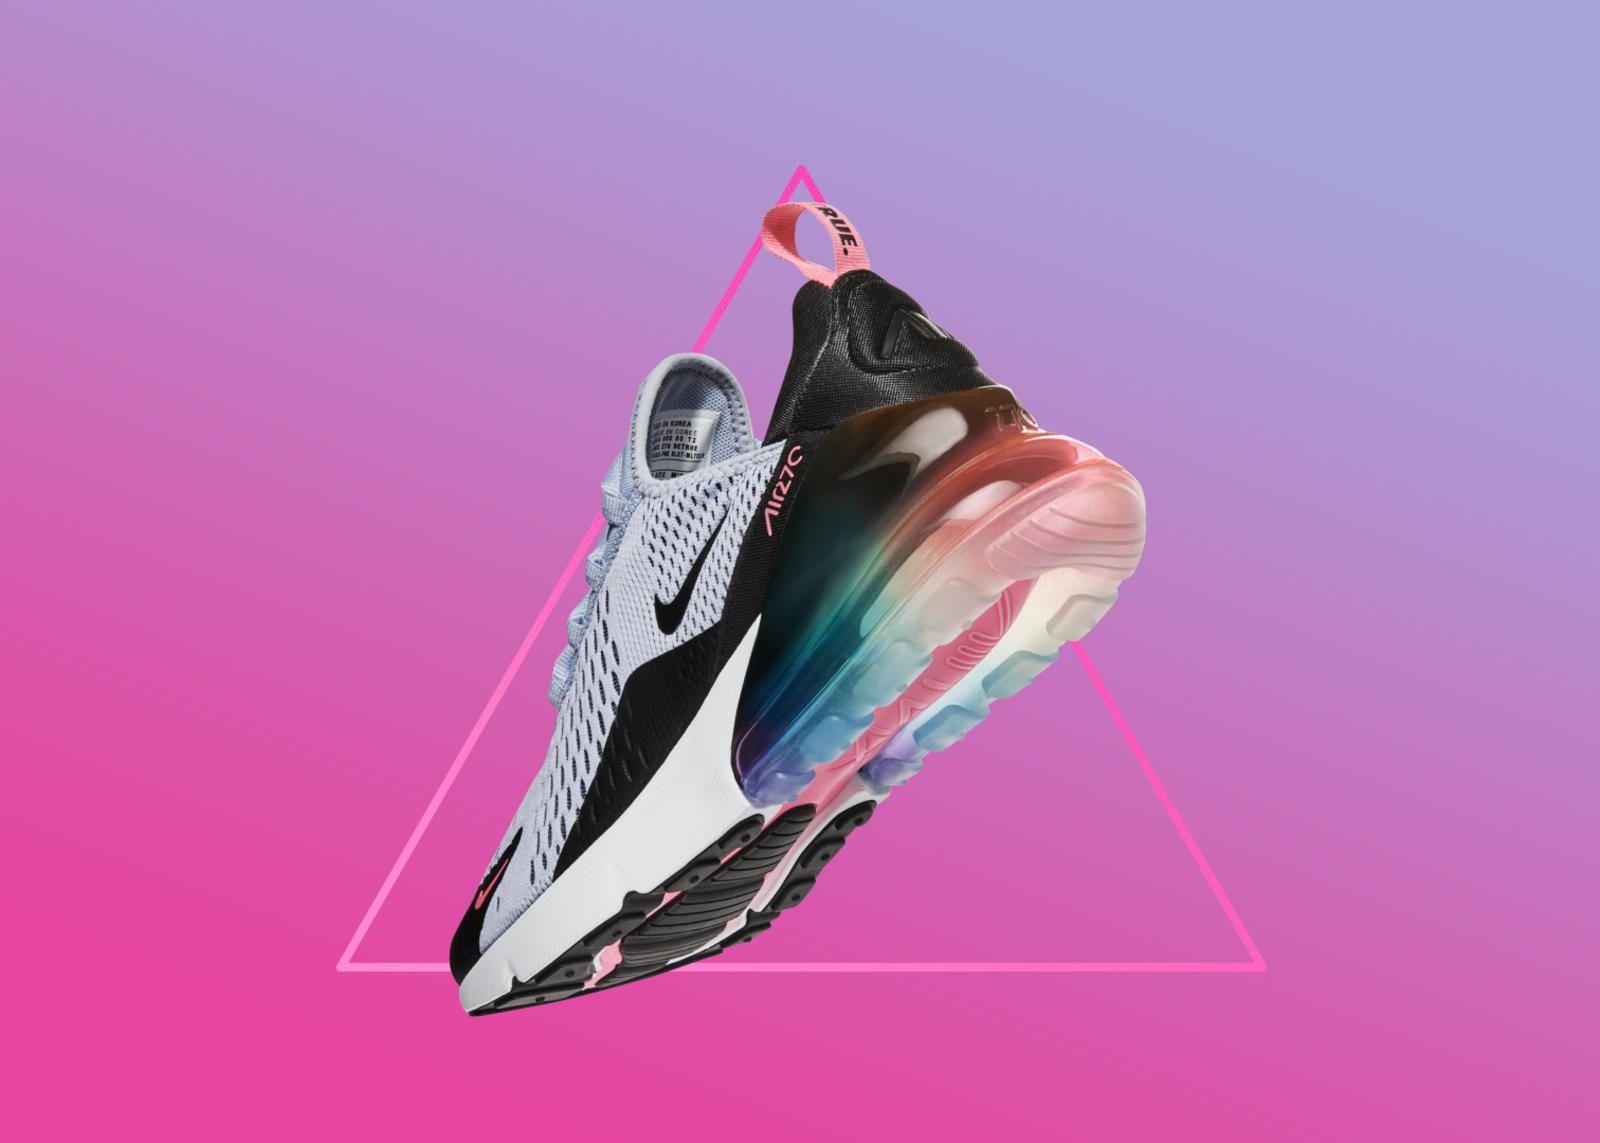 Nike Shoes with the Triangle Logo - Nike BETRUE 2018 Collection - Nike News